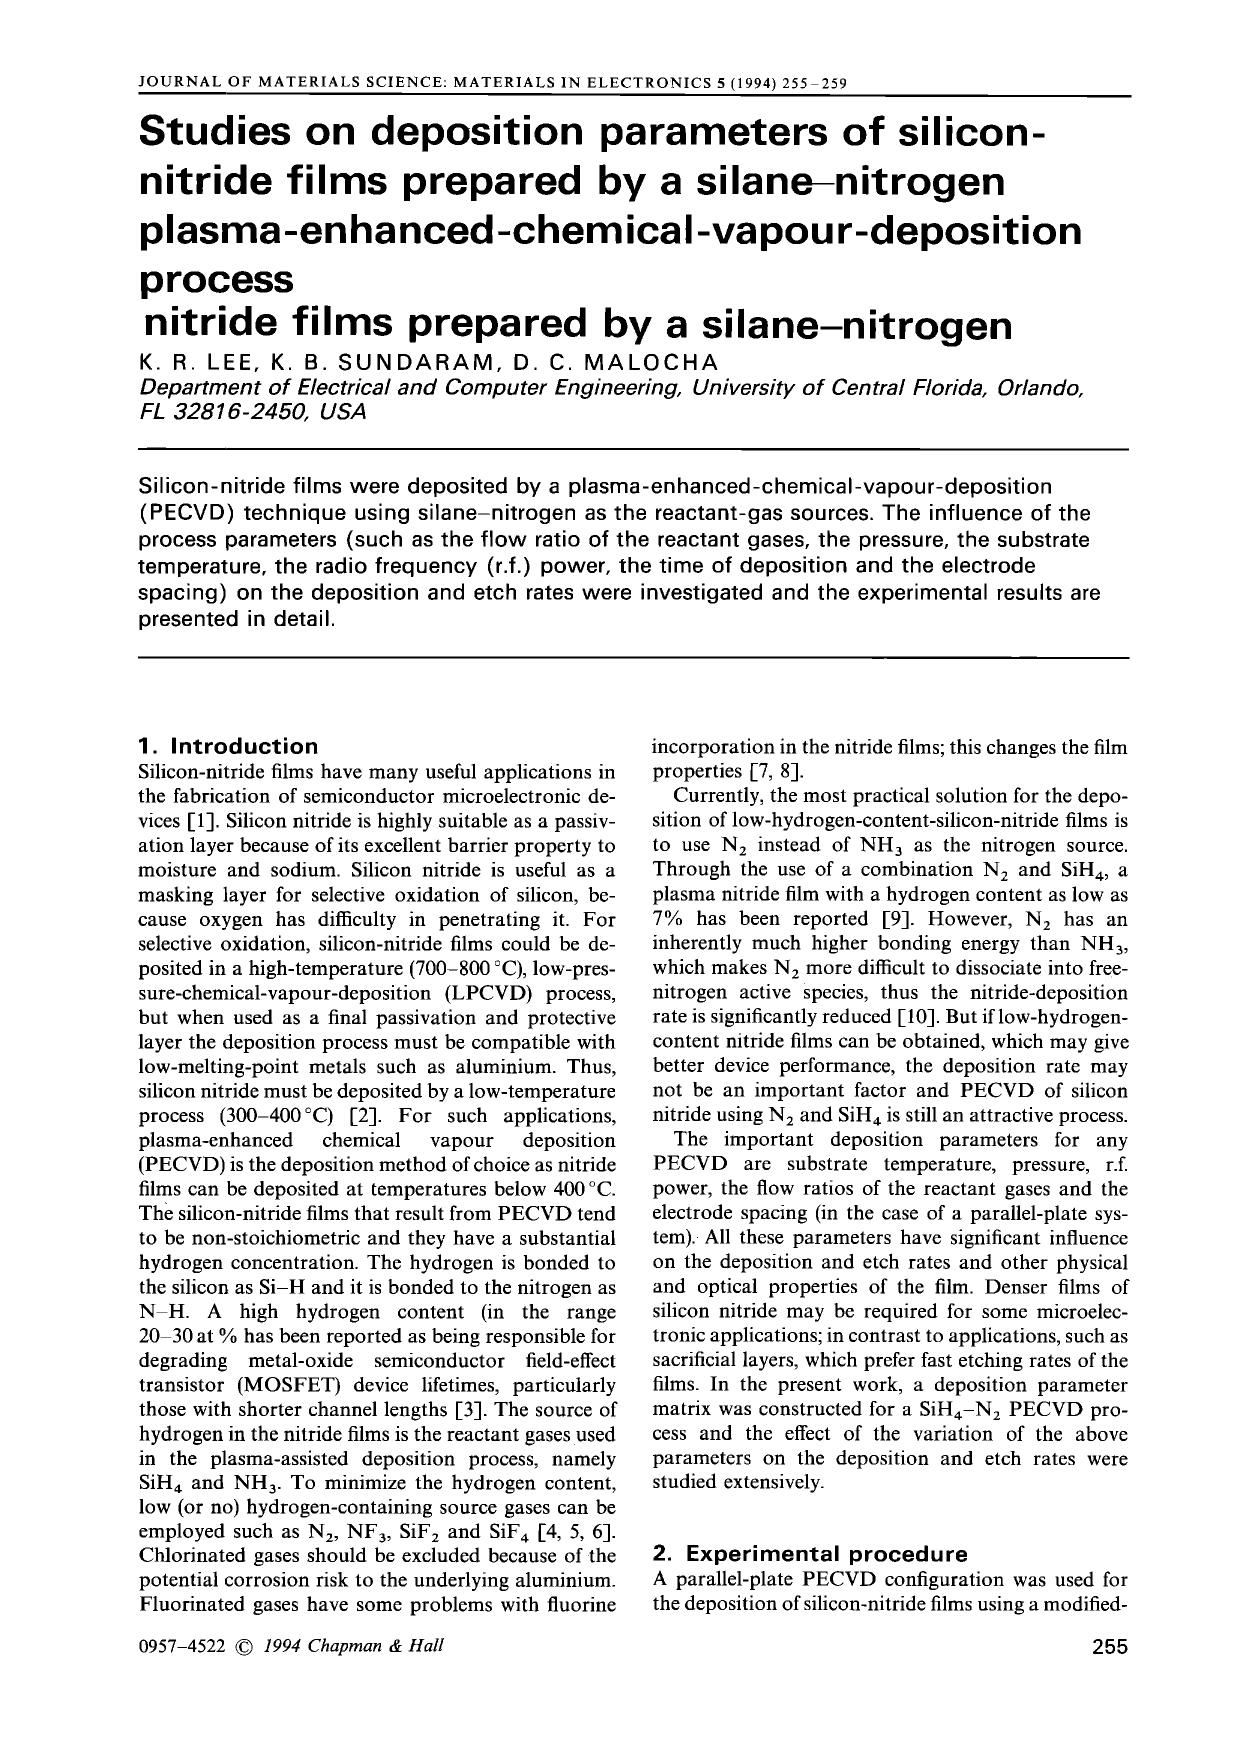 Studies on deposition parameters of silicon-nitride films prepared by a silane&#x2014;nitrogen plasma-enhanced-chemical-vapour-deposition process nitride films prepared by a silane&#x2014;nitrogen by Unknown